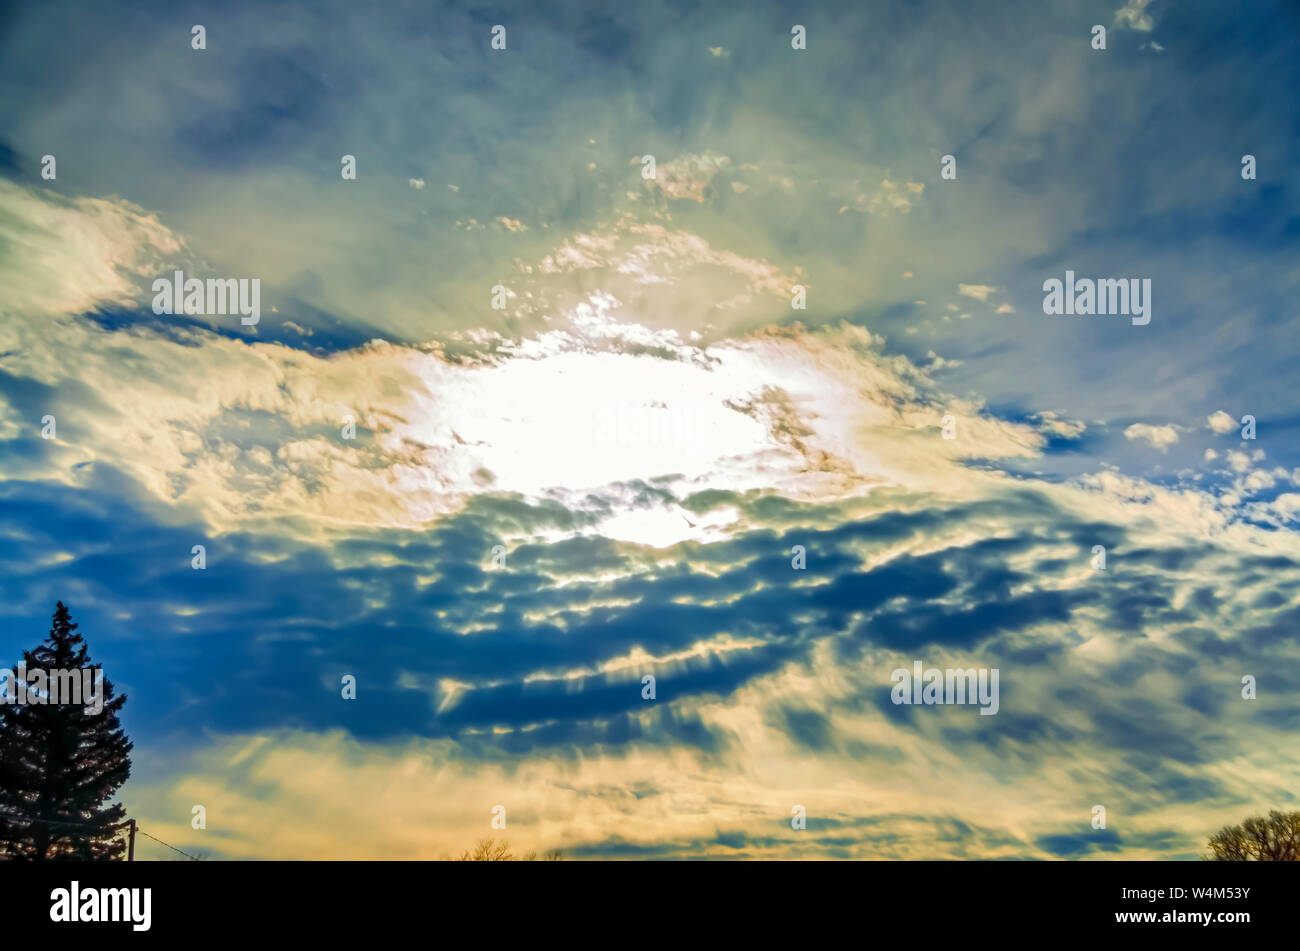 The song and dance between the sun and the clouds to create a dramatic evening sky. Stock Photo